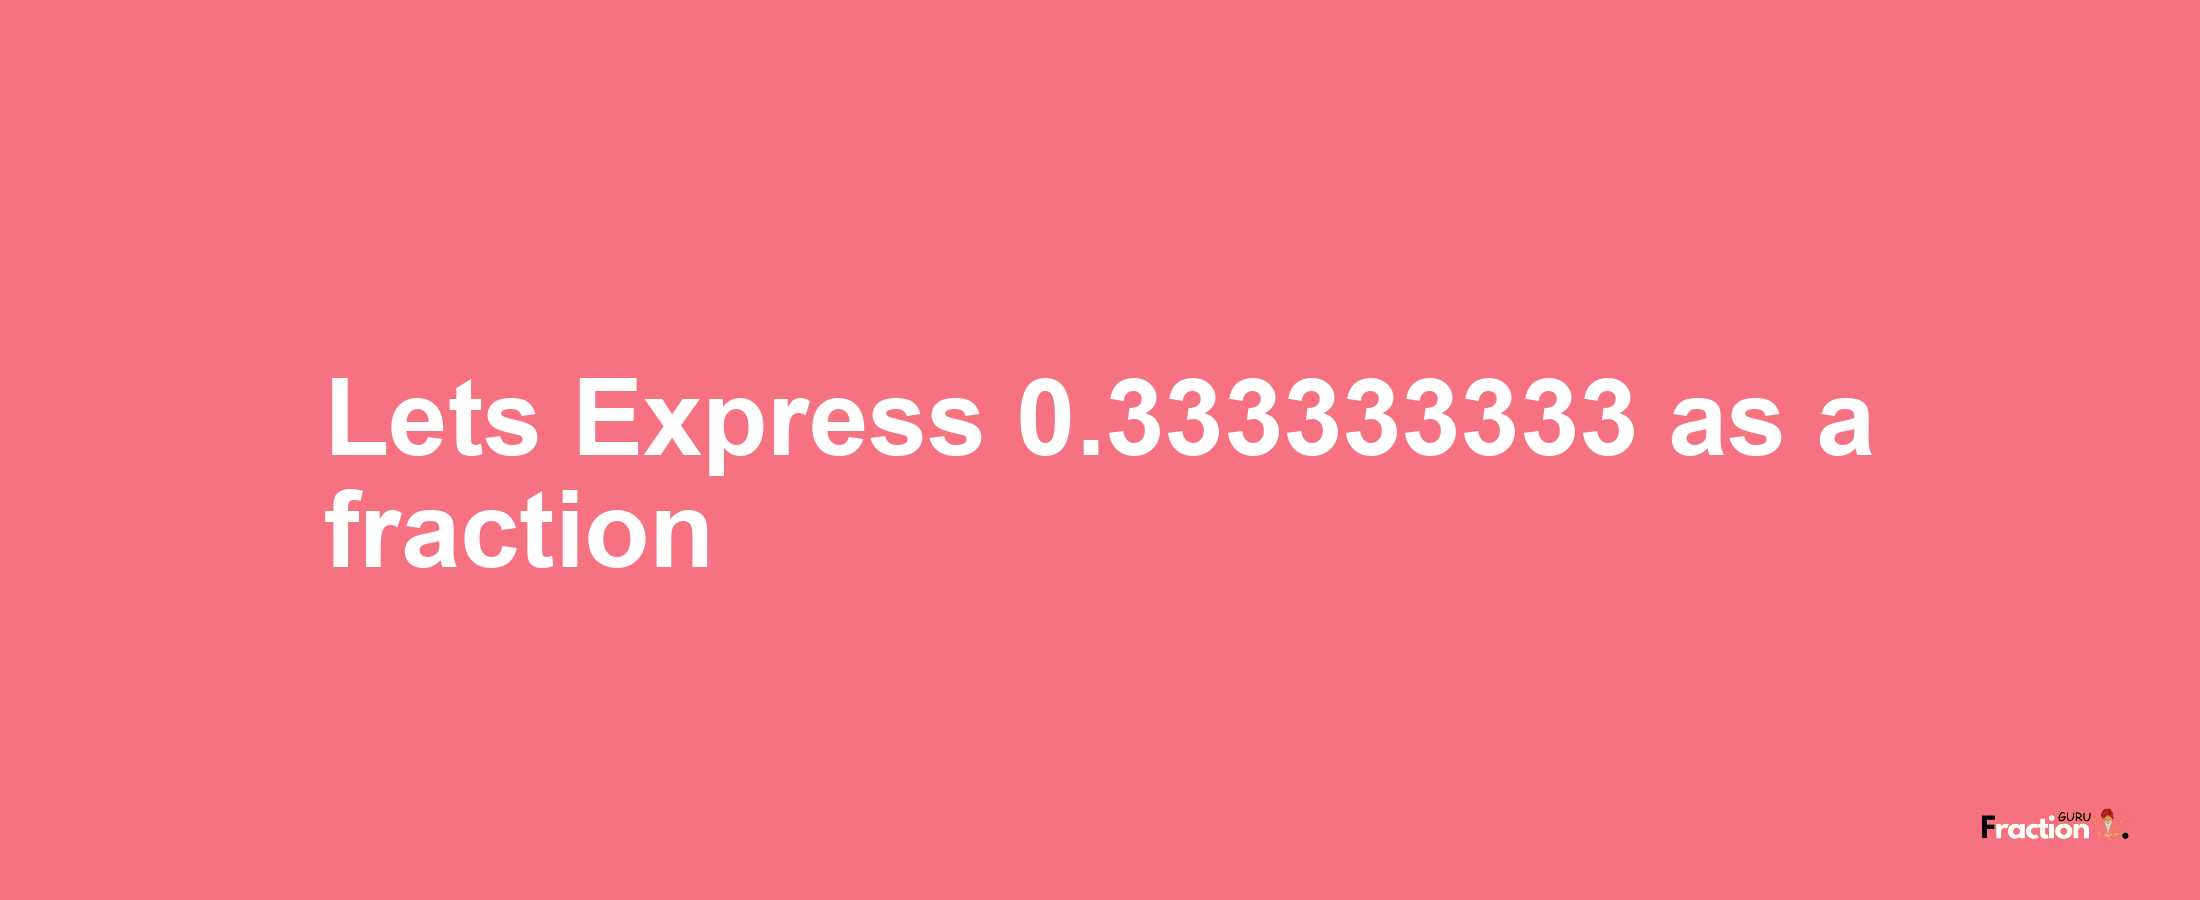 Lets Express 0.333333333 as afraction